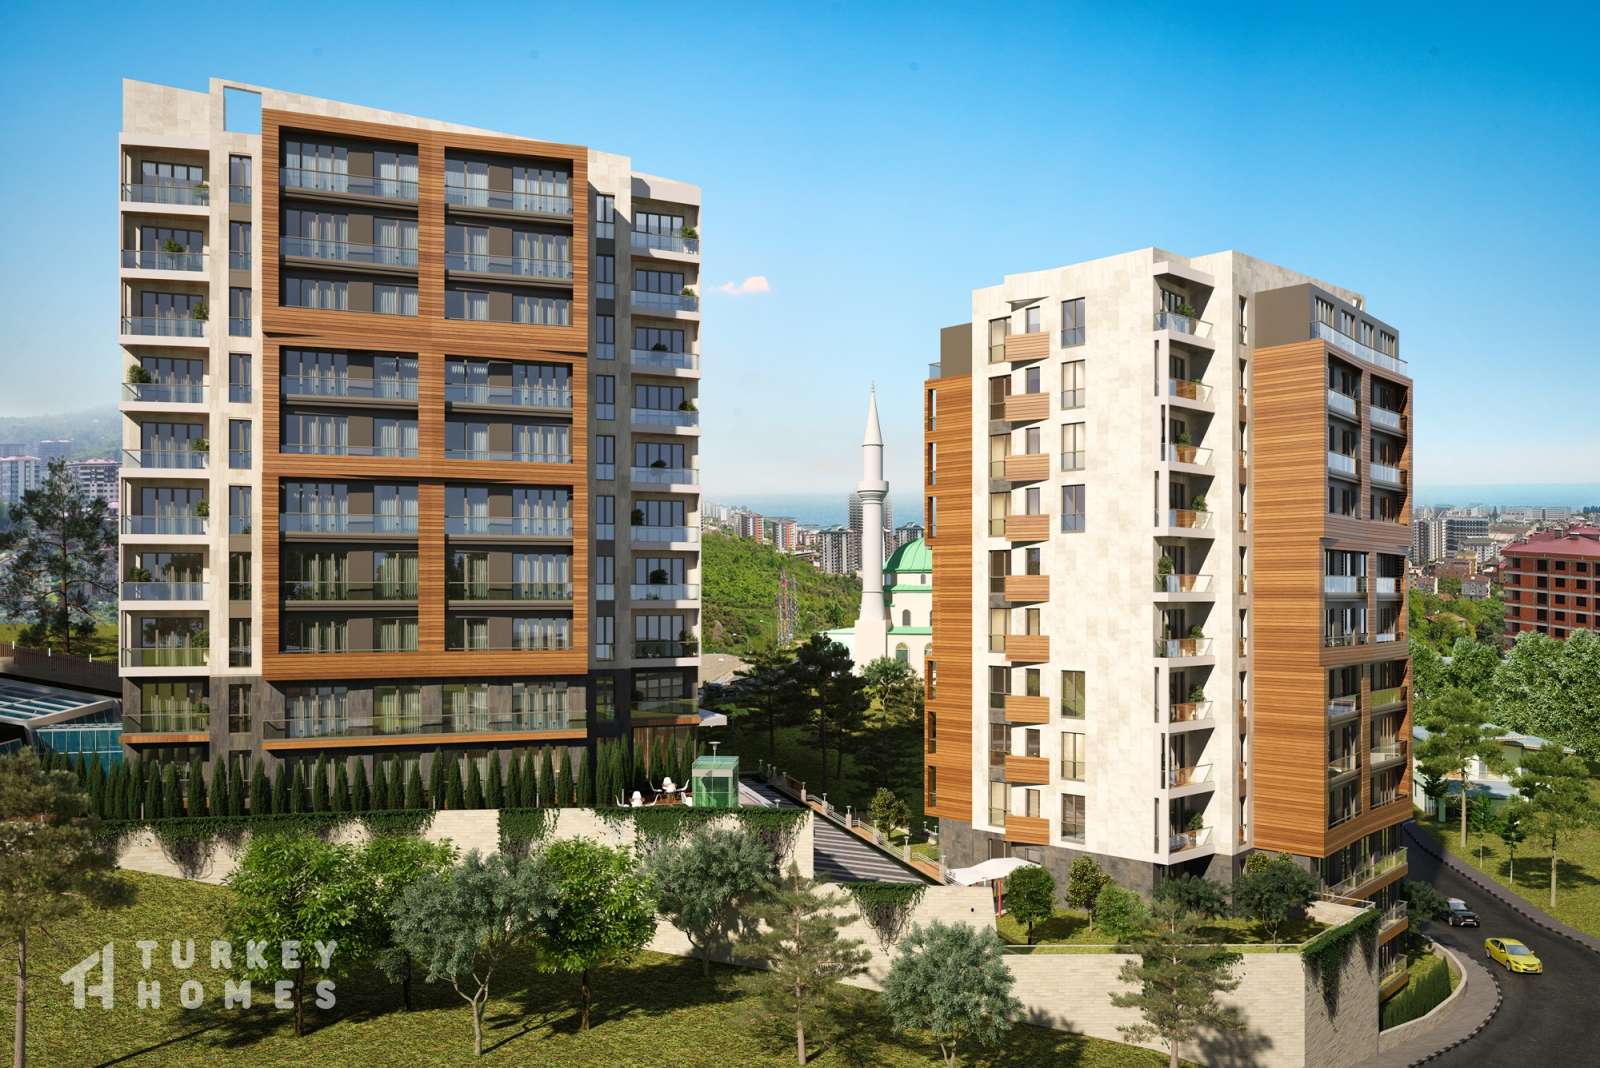 Trabzon Sea View Investment Apartments - Marriot Hotel block and residential block